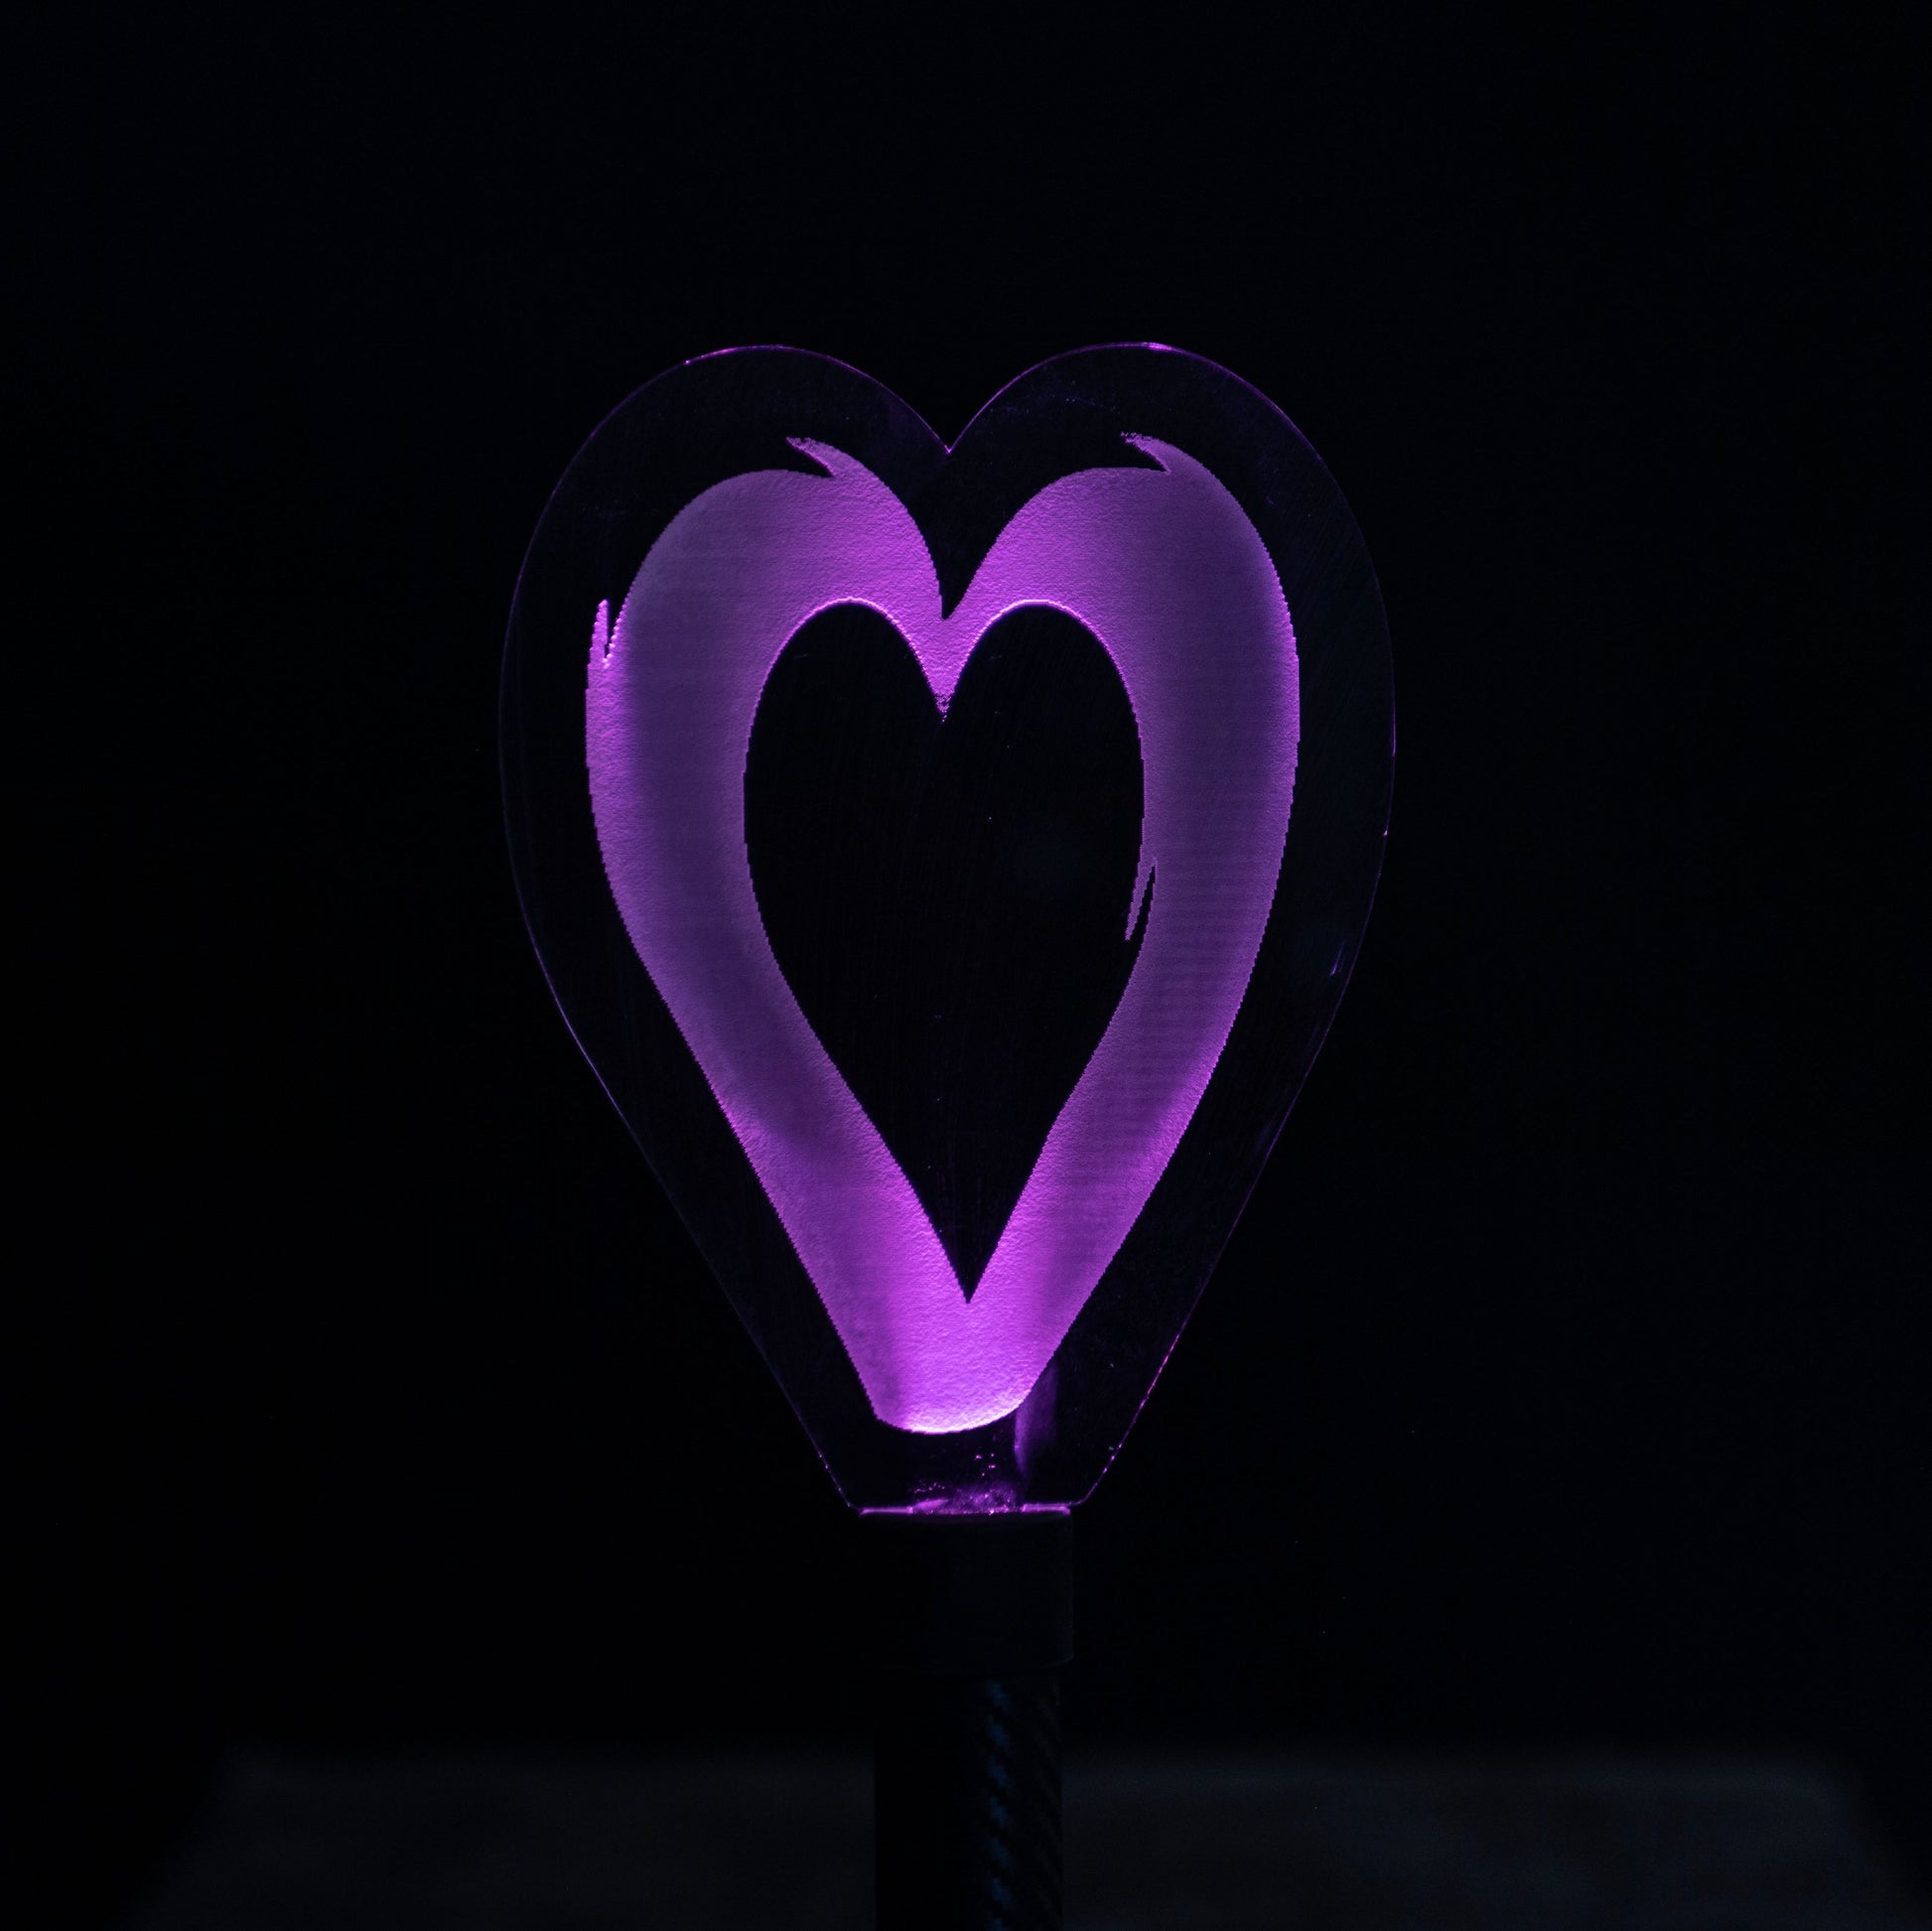 Burning love blade with light painting photography example